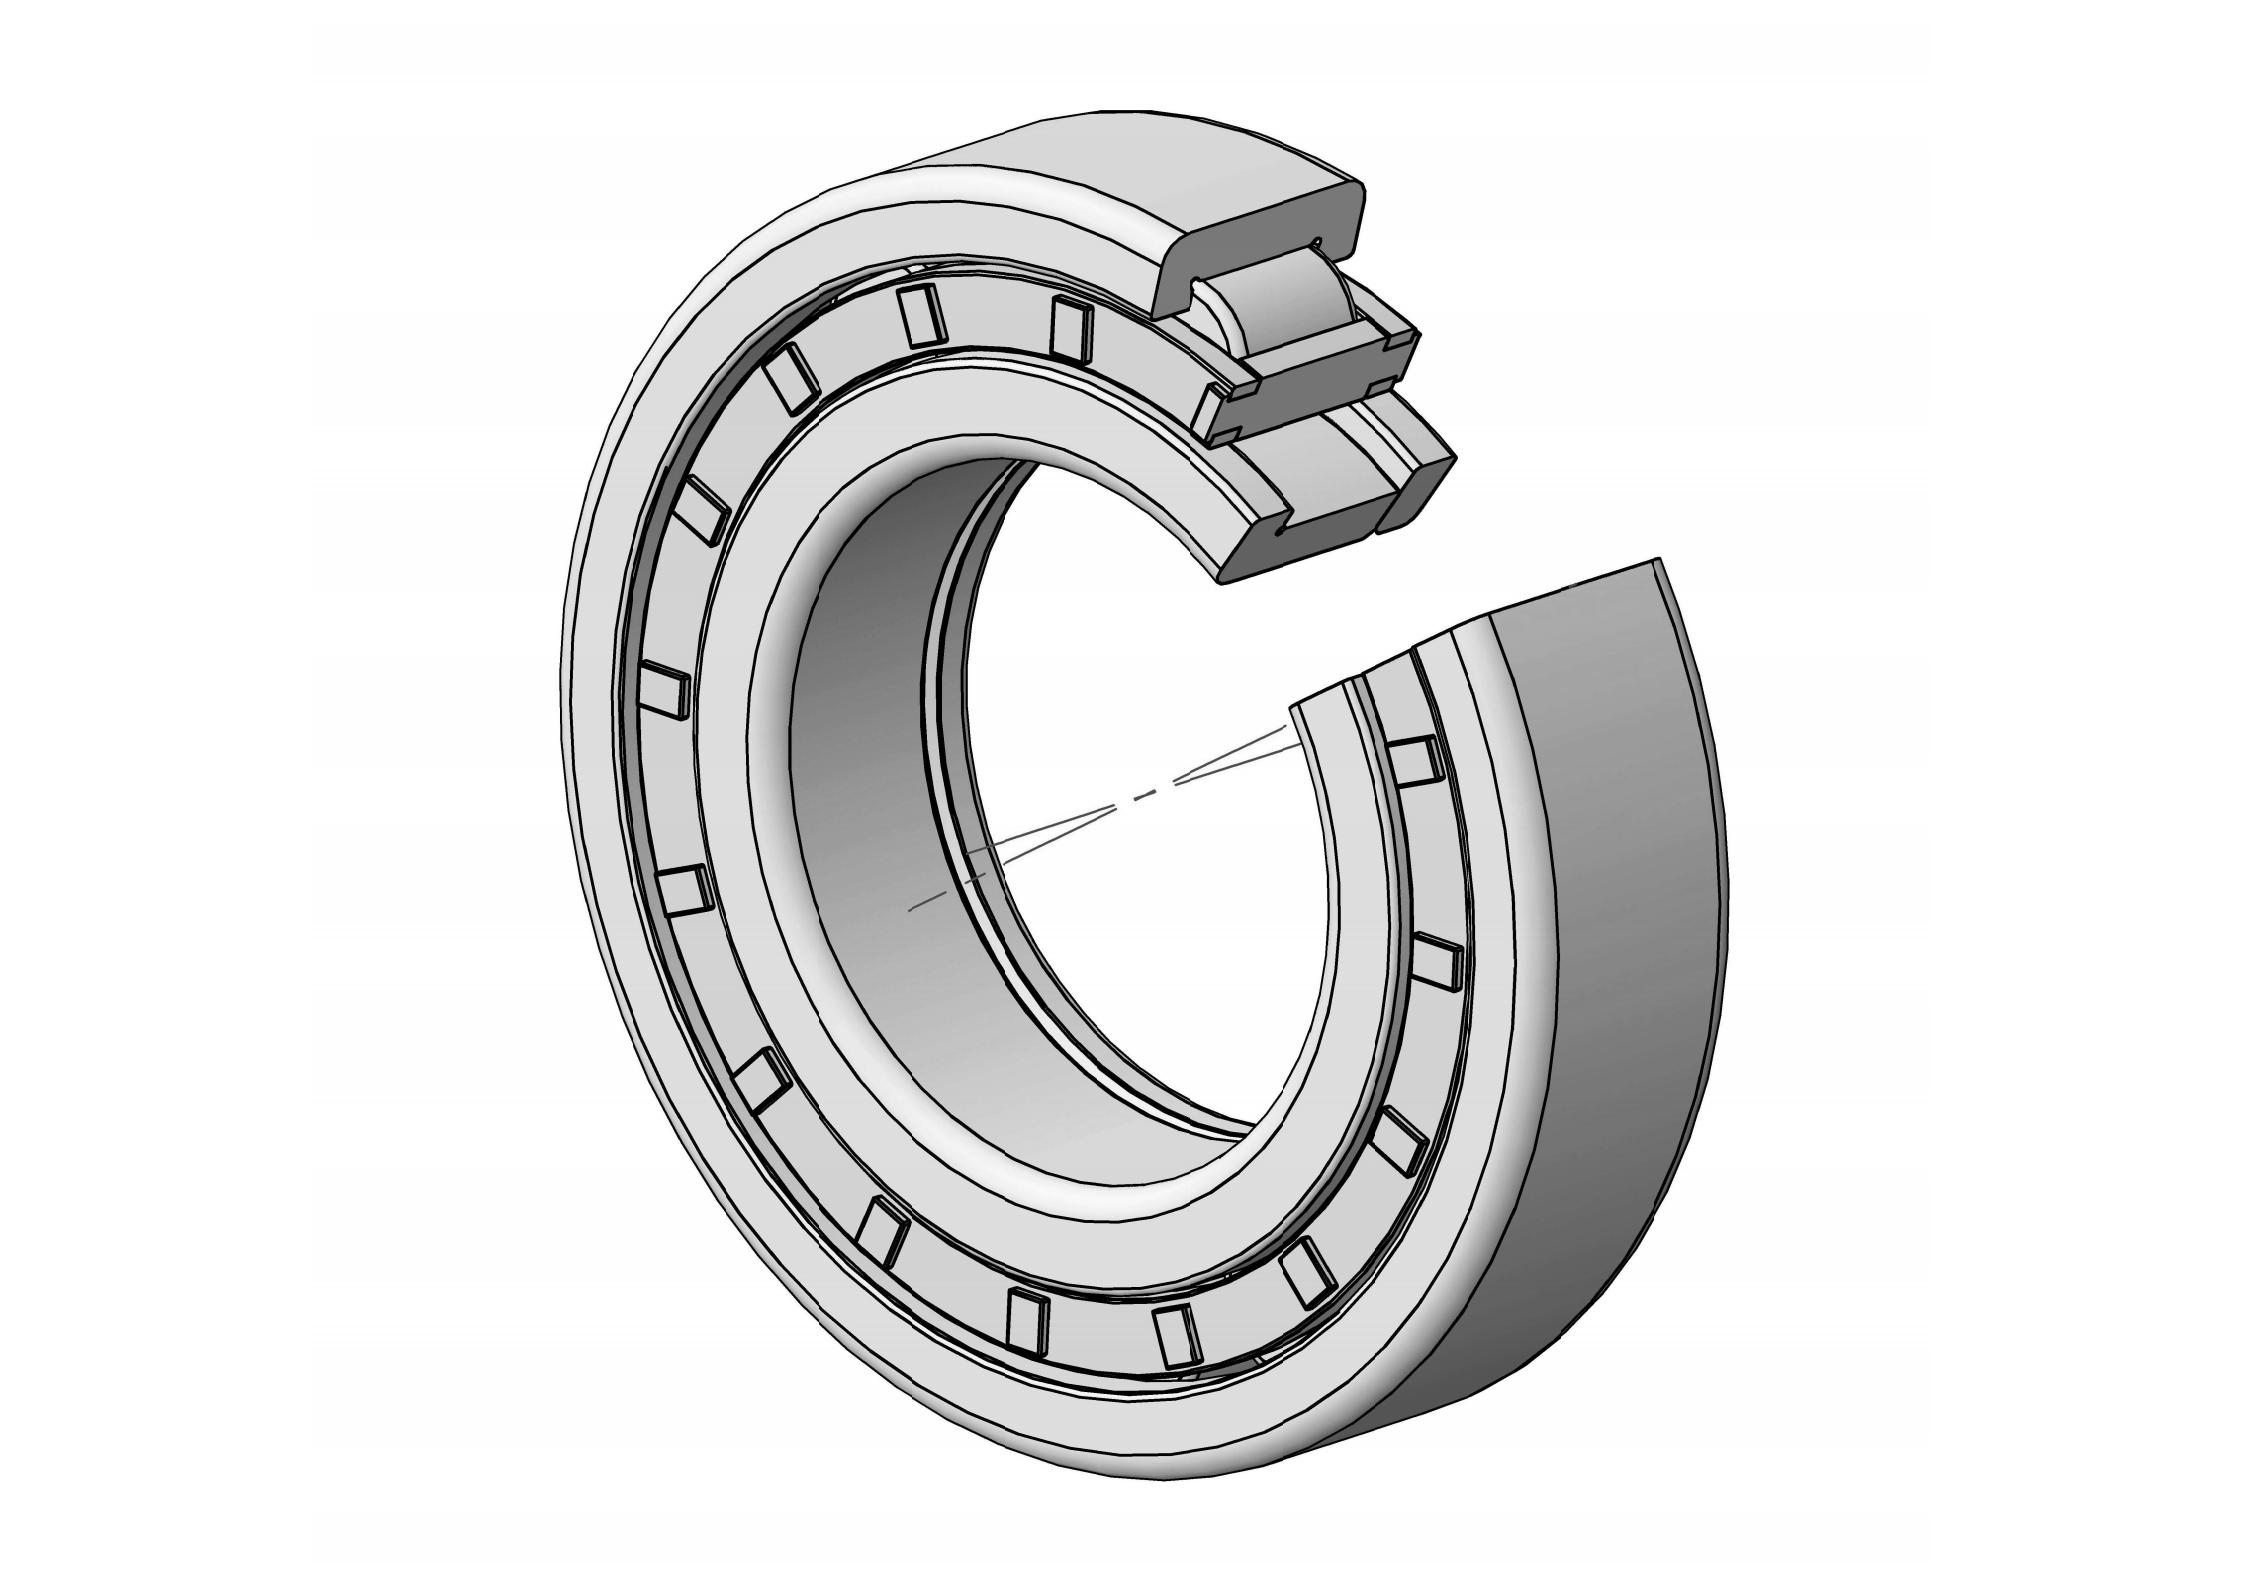 NUP312-E Single Row Cylindrical roller bearing 